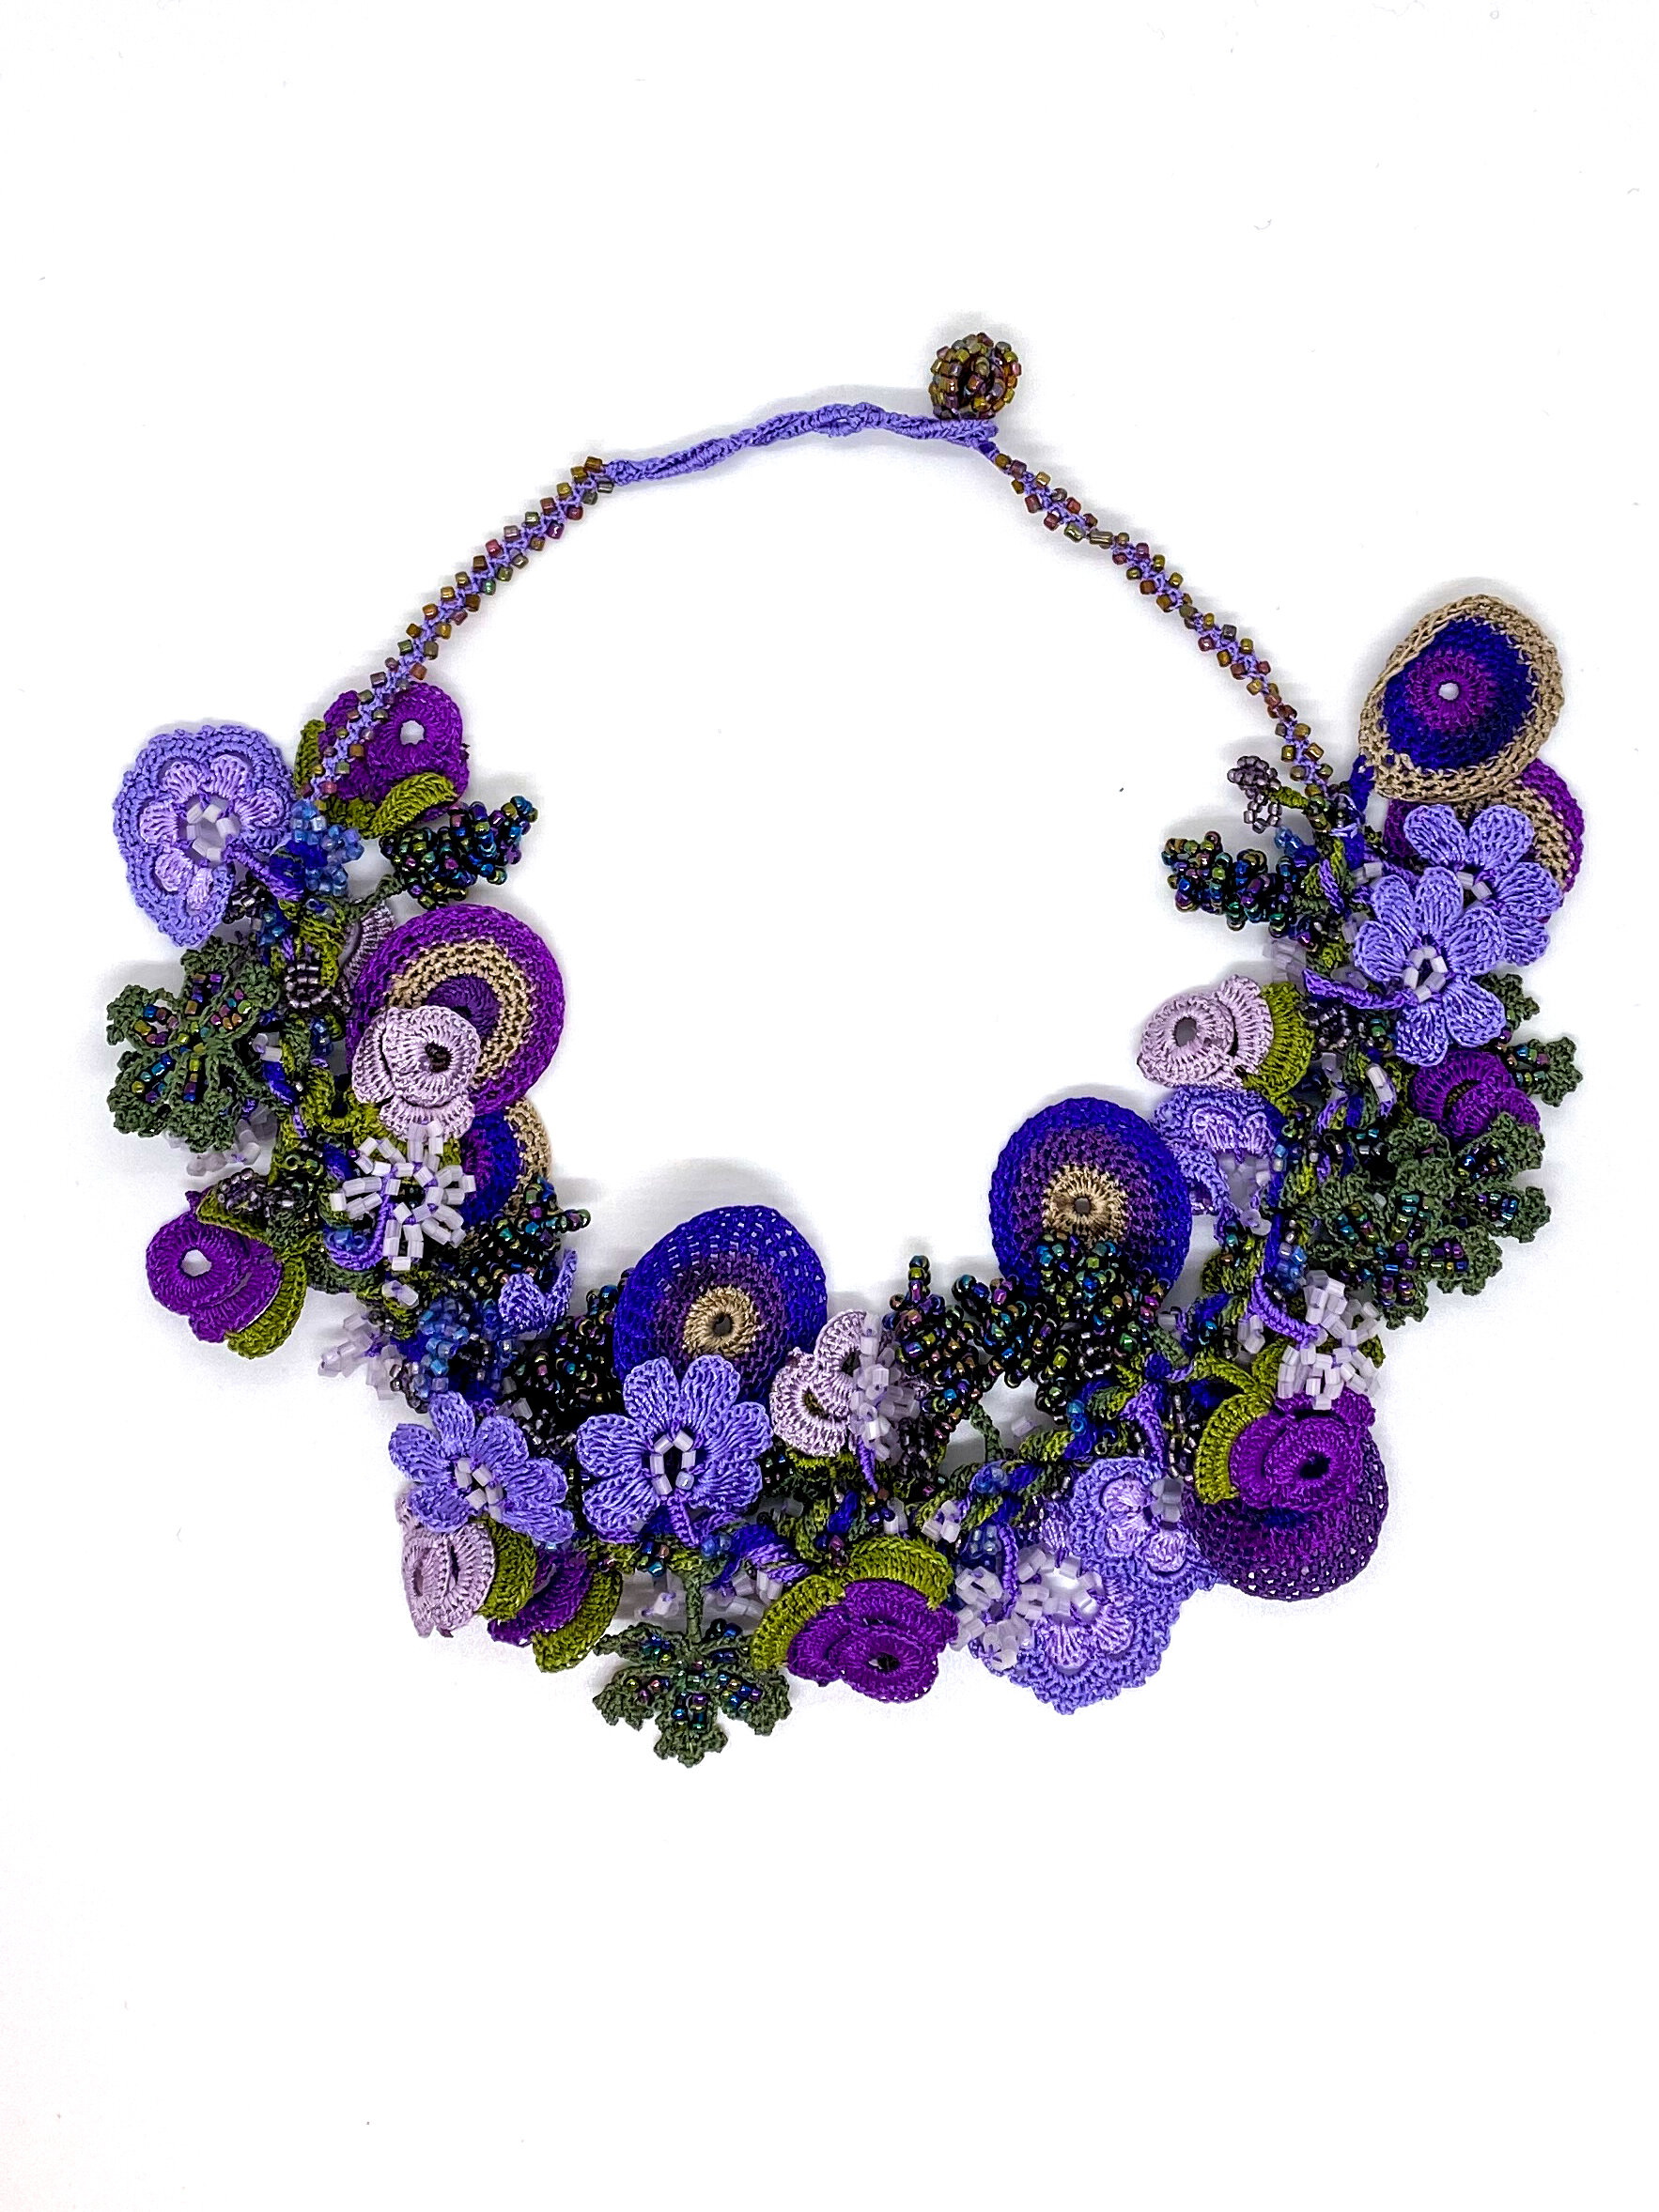 How to Crochet a necklace with beads Class - Island Cove Beads & Gallery